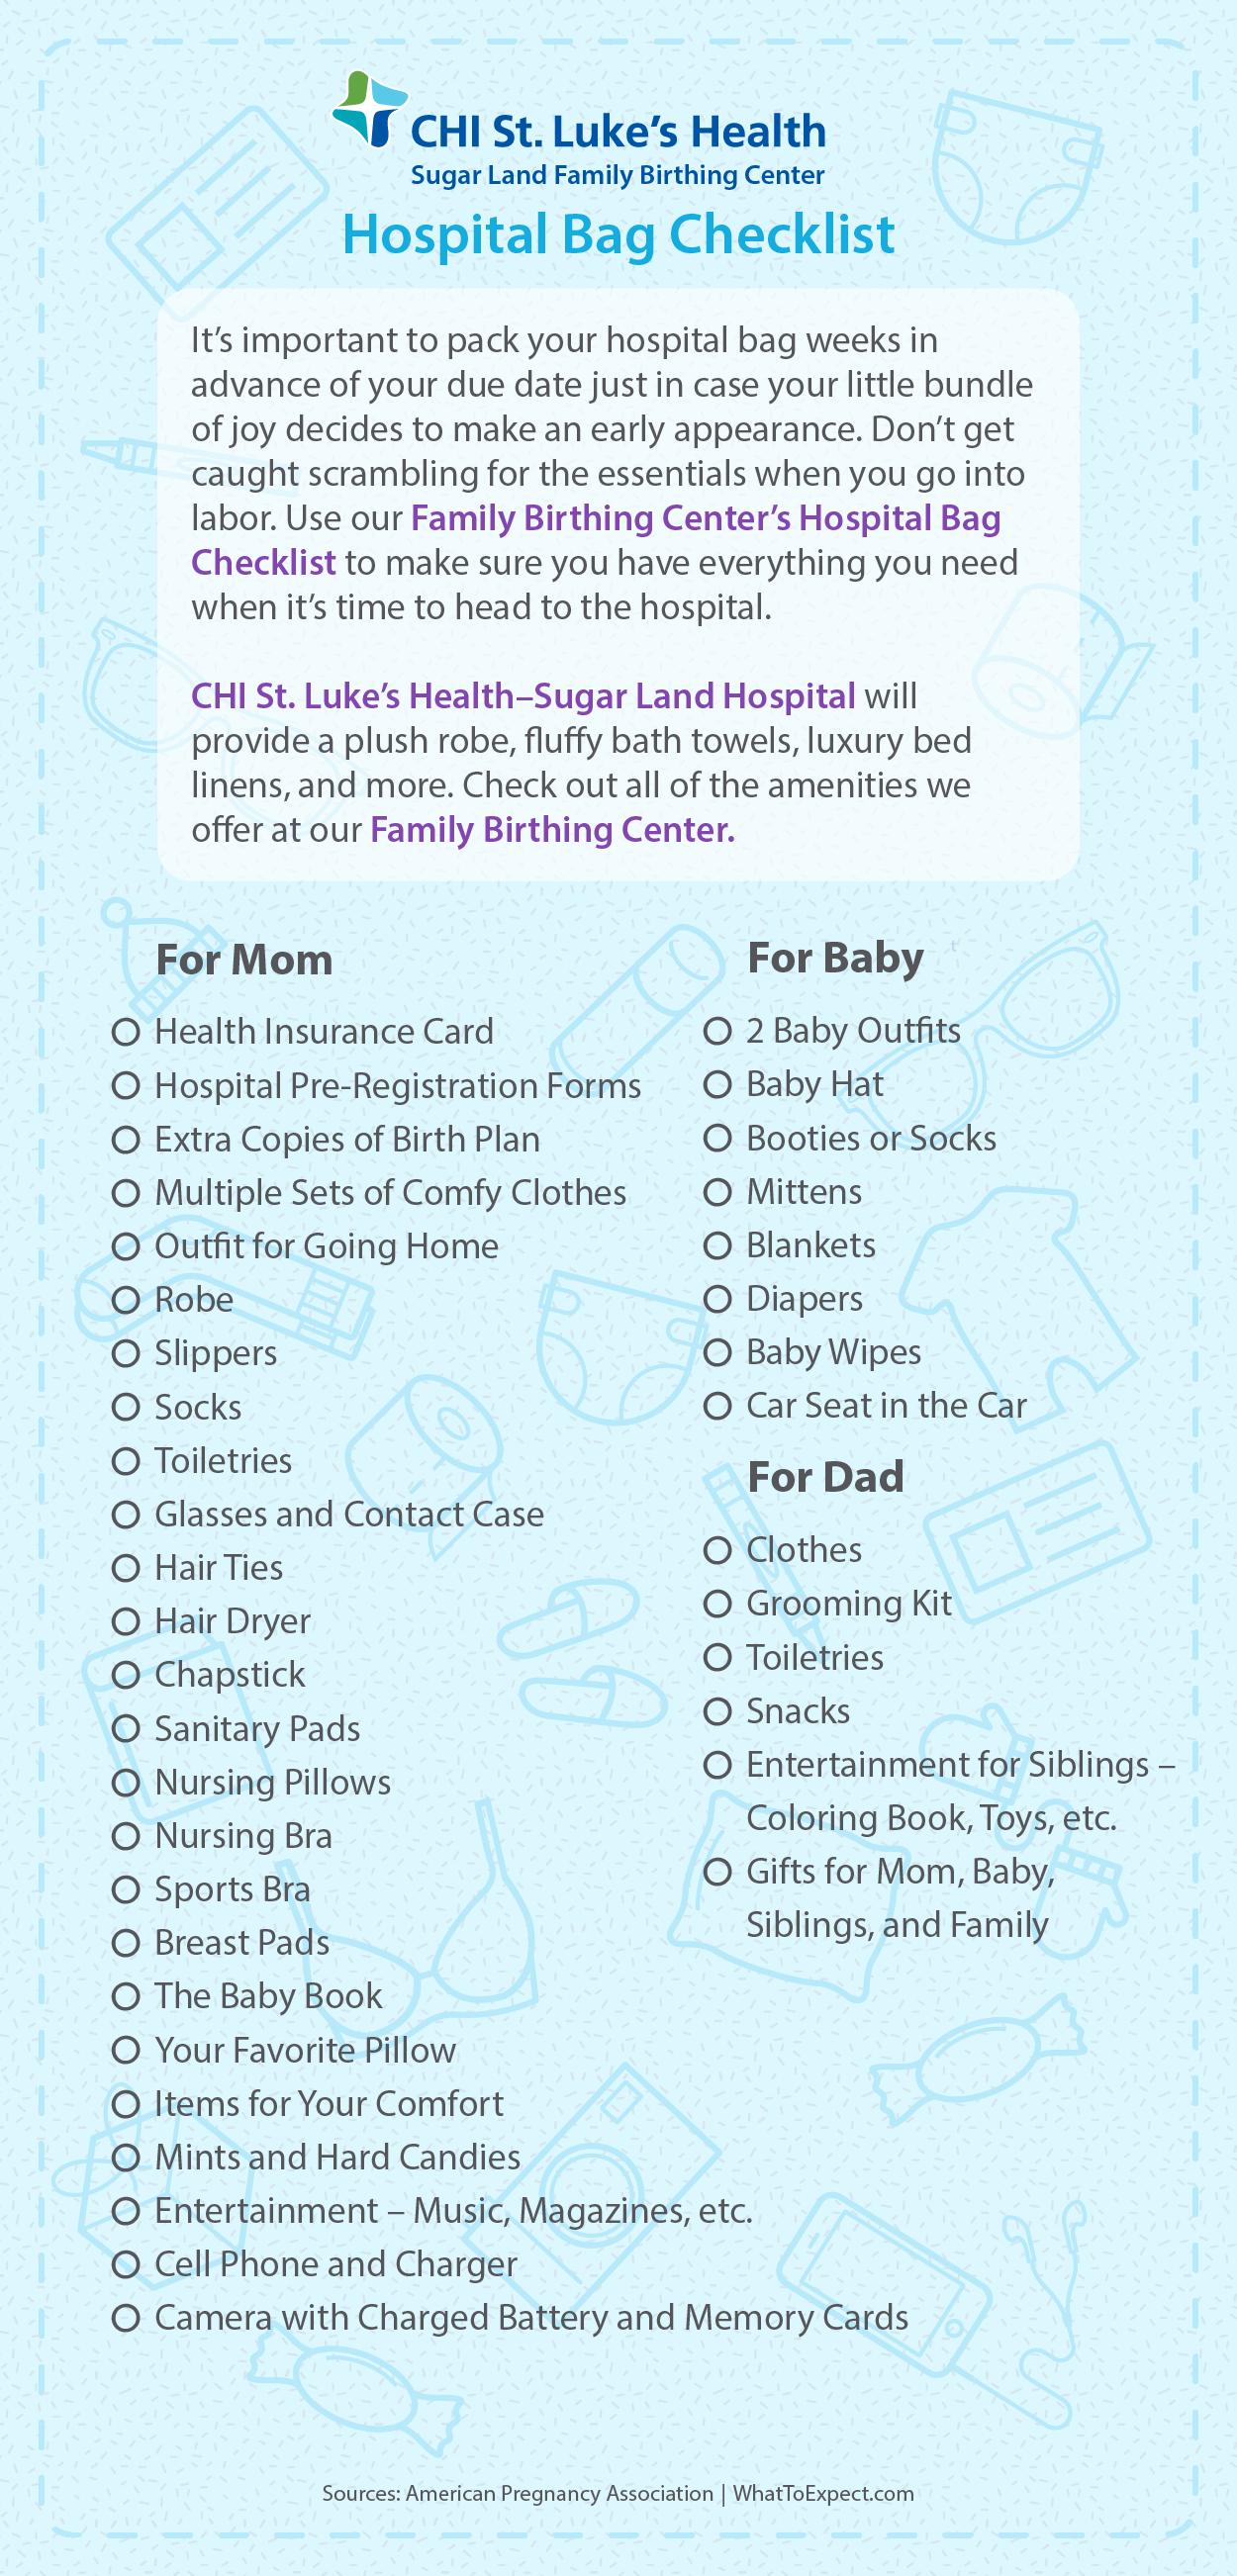 What to Pack in Your Hospital Bag, St. Luke's Health